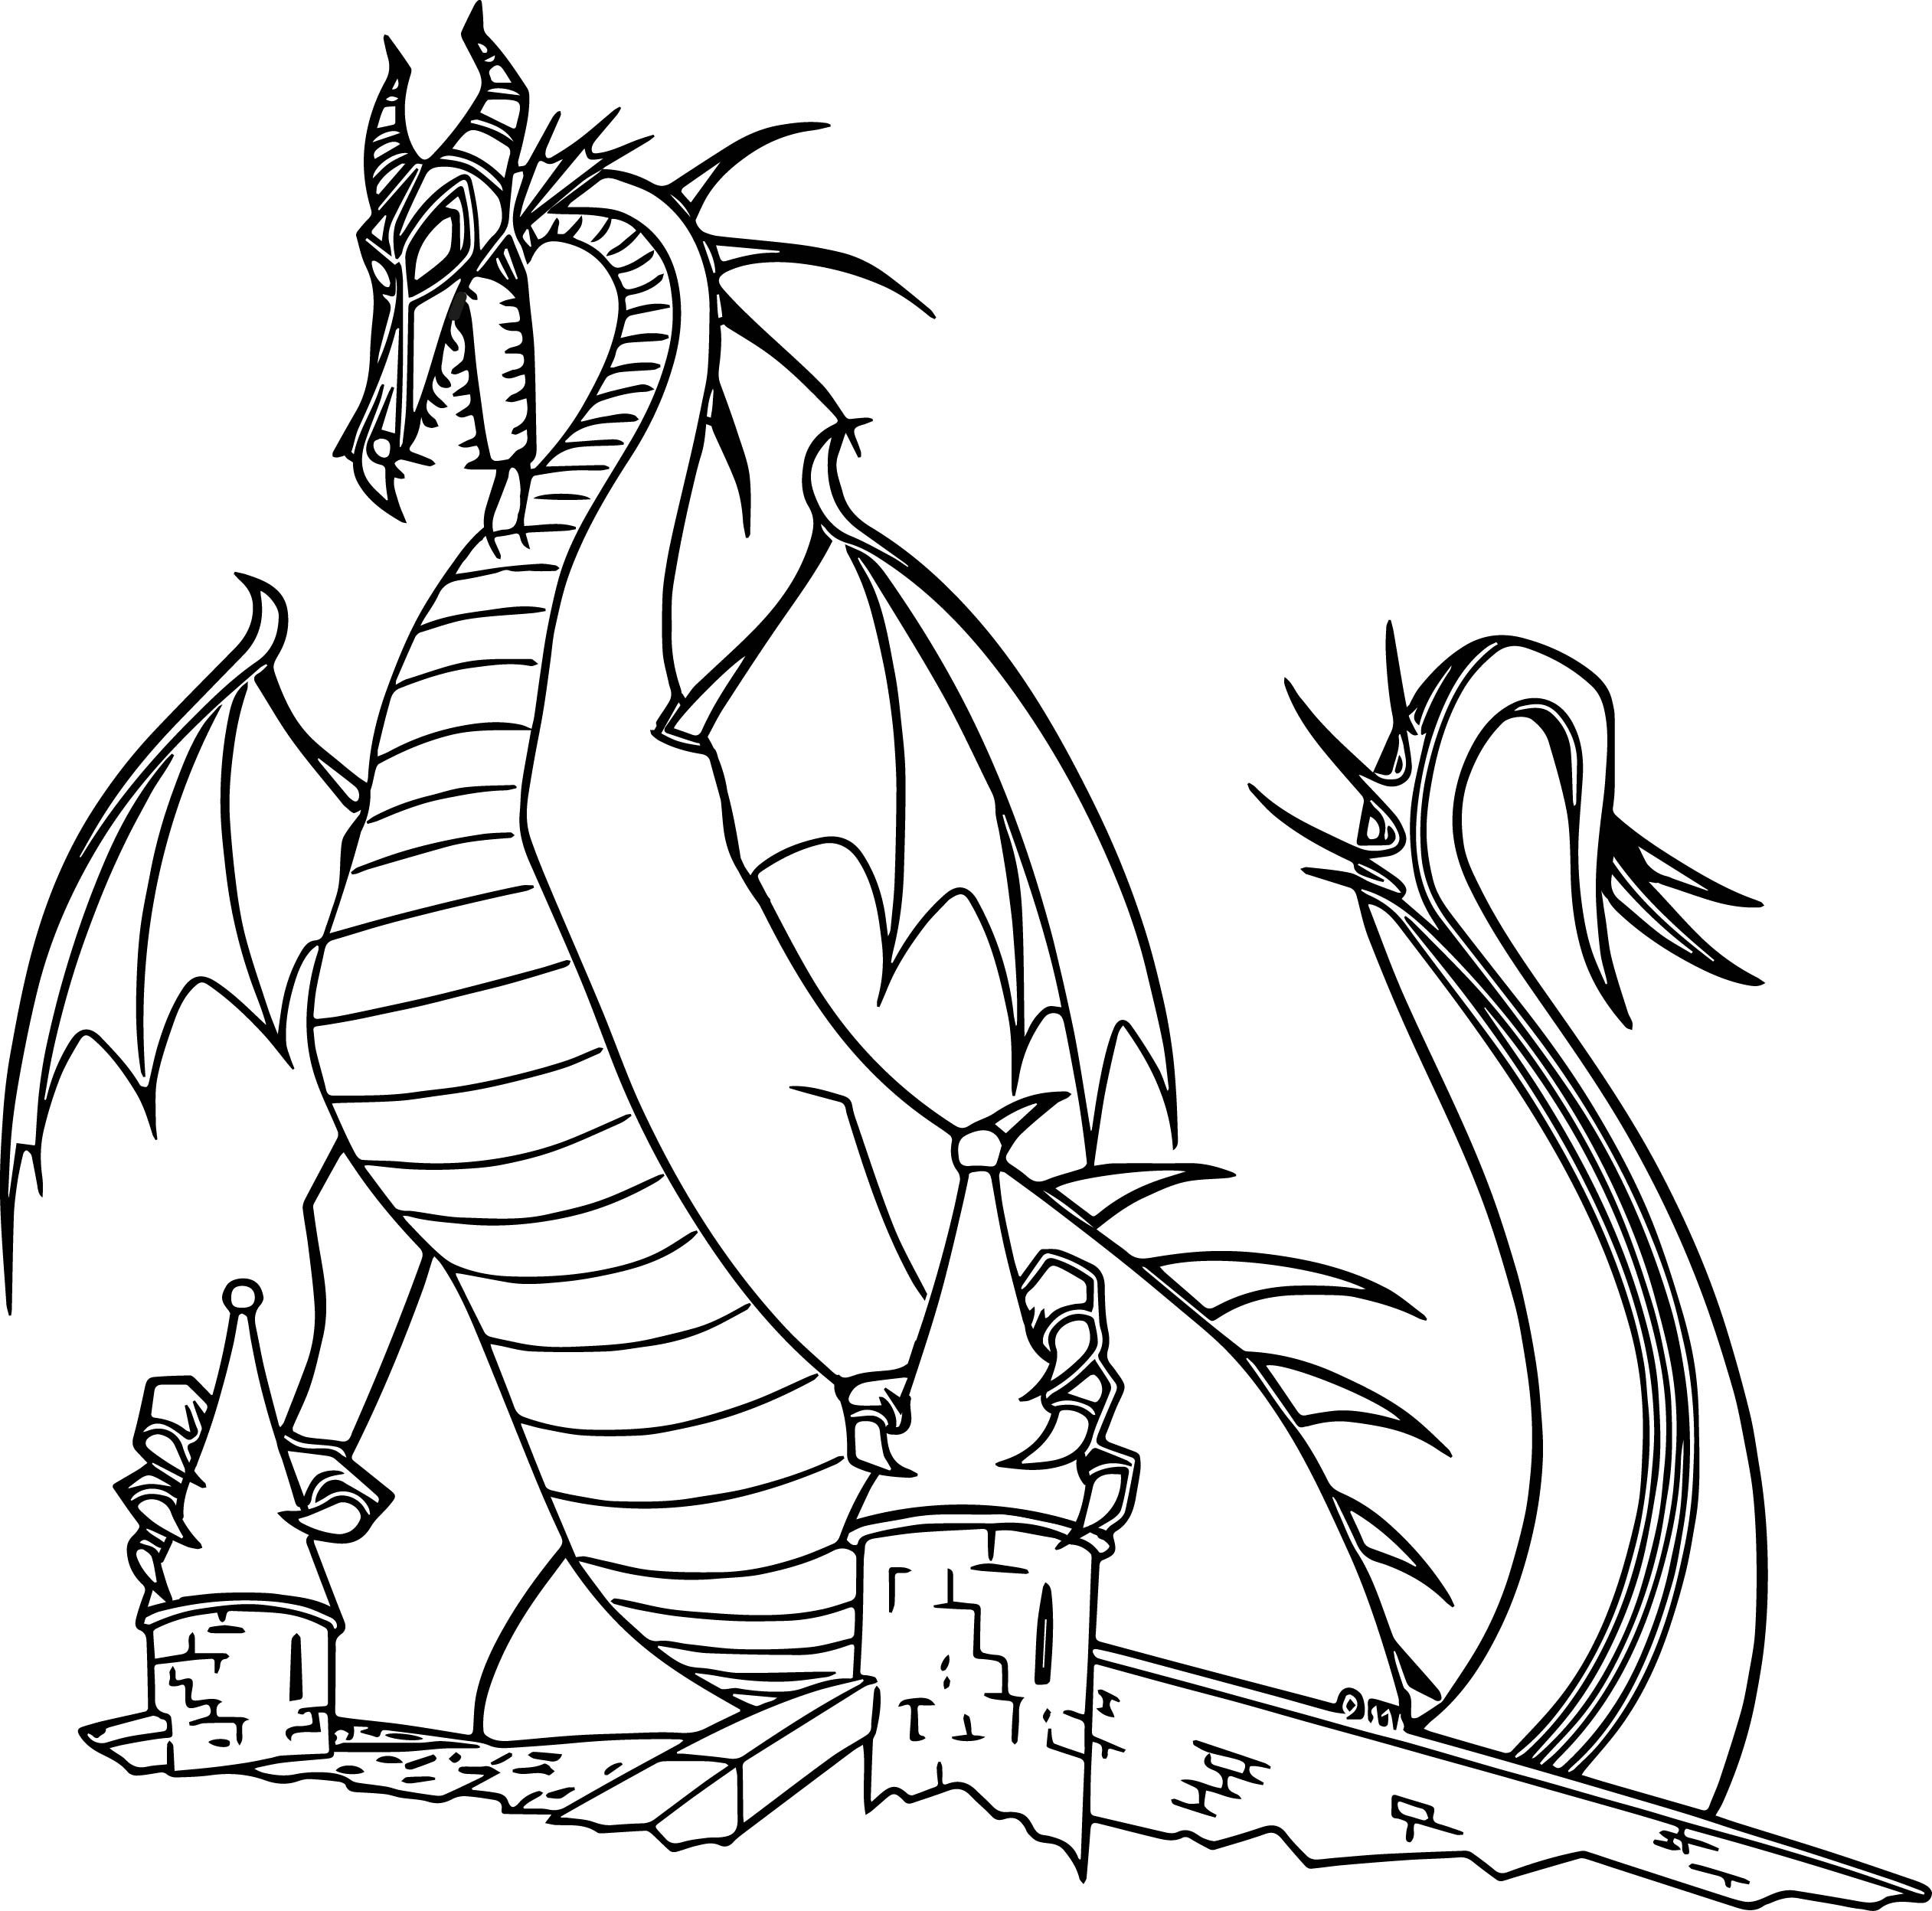 Sleeping Beauty Dragon Coloring Page - Free Printable Coloring Pages for Kids